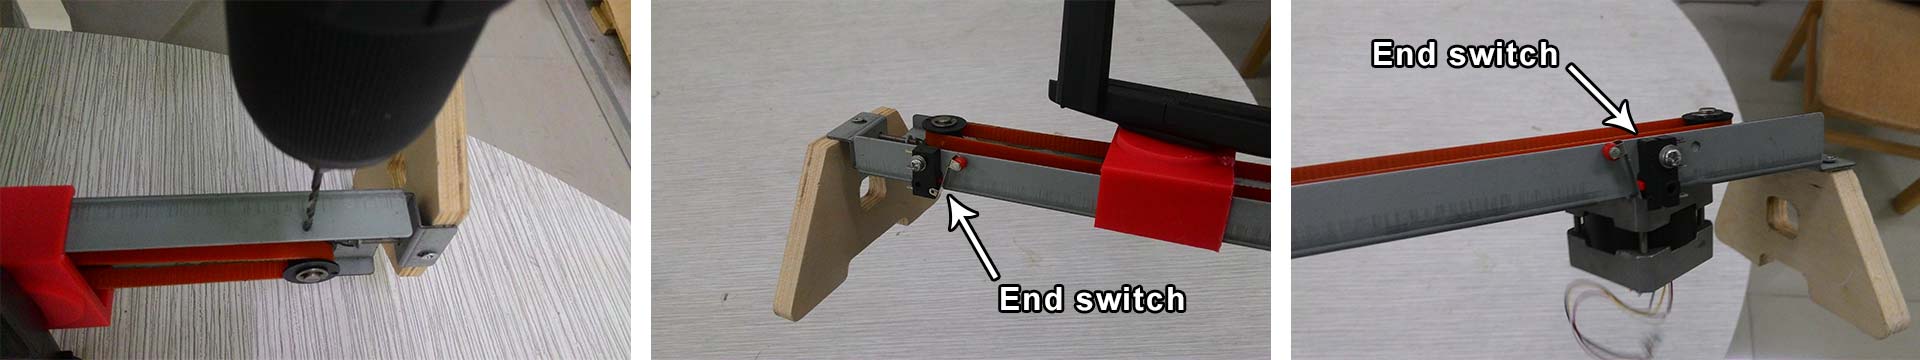 end-switch